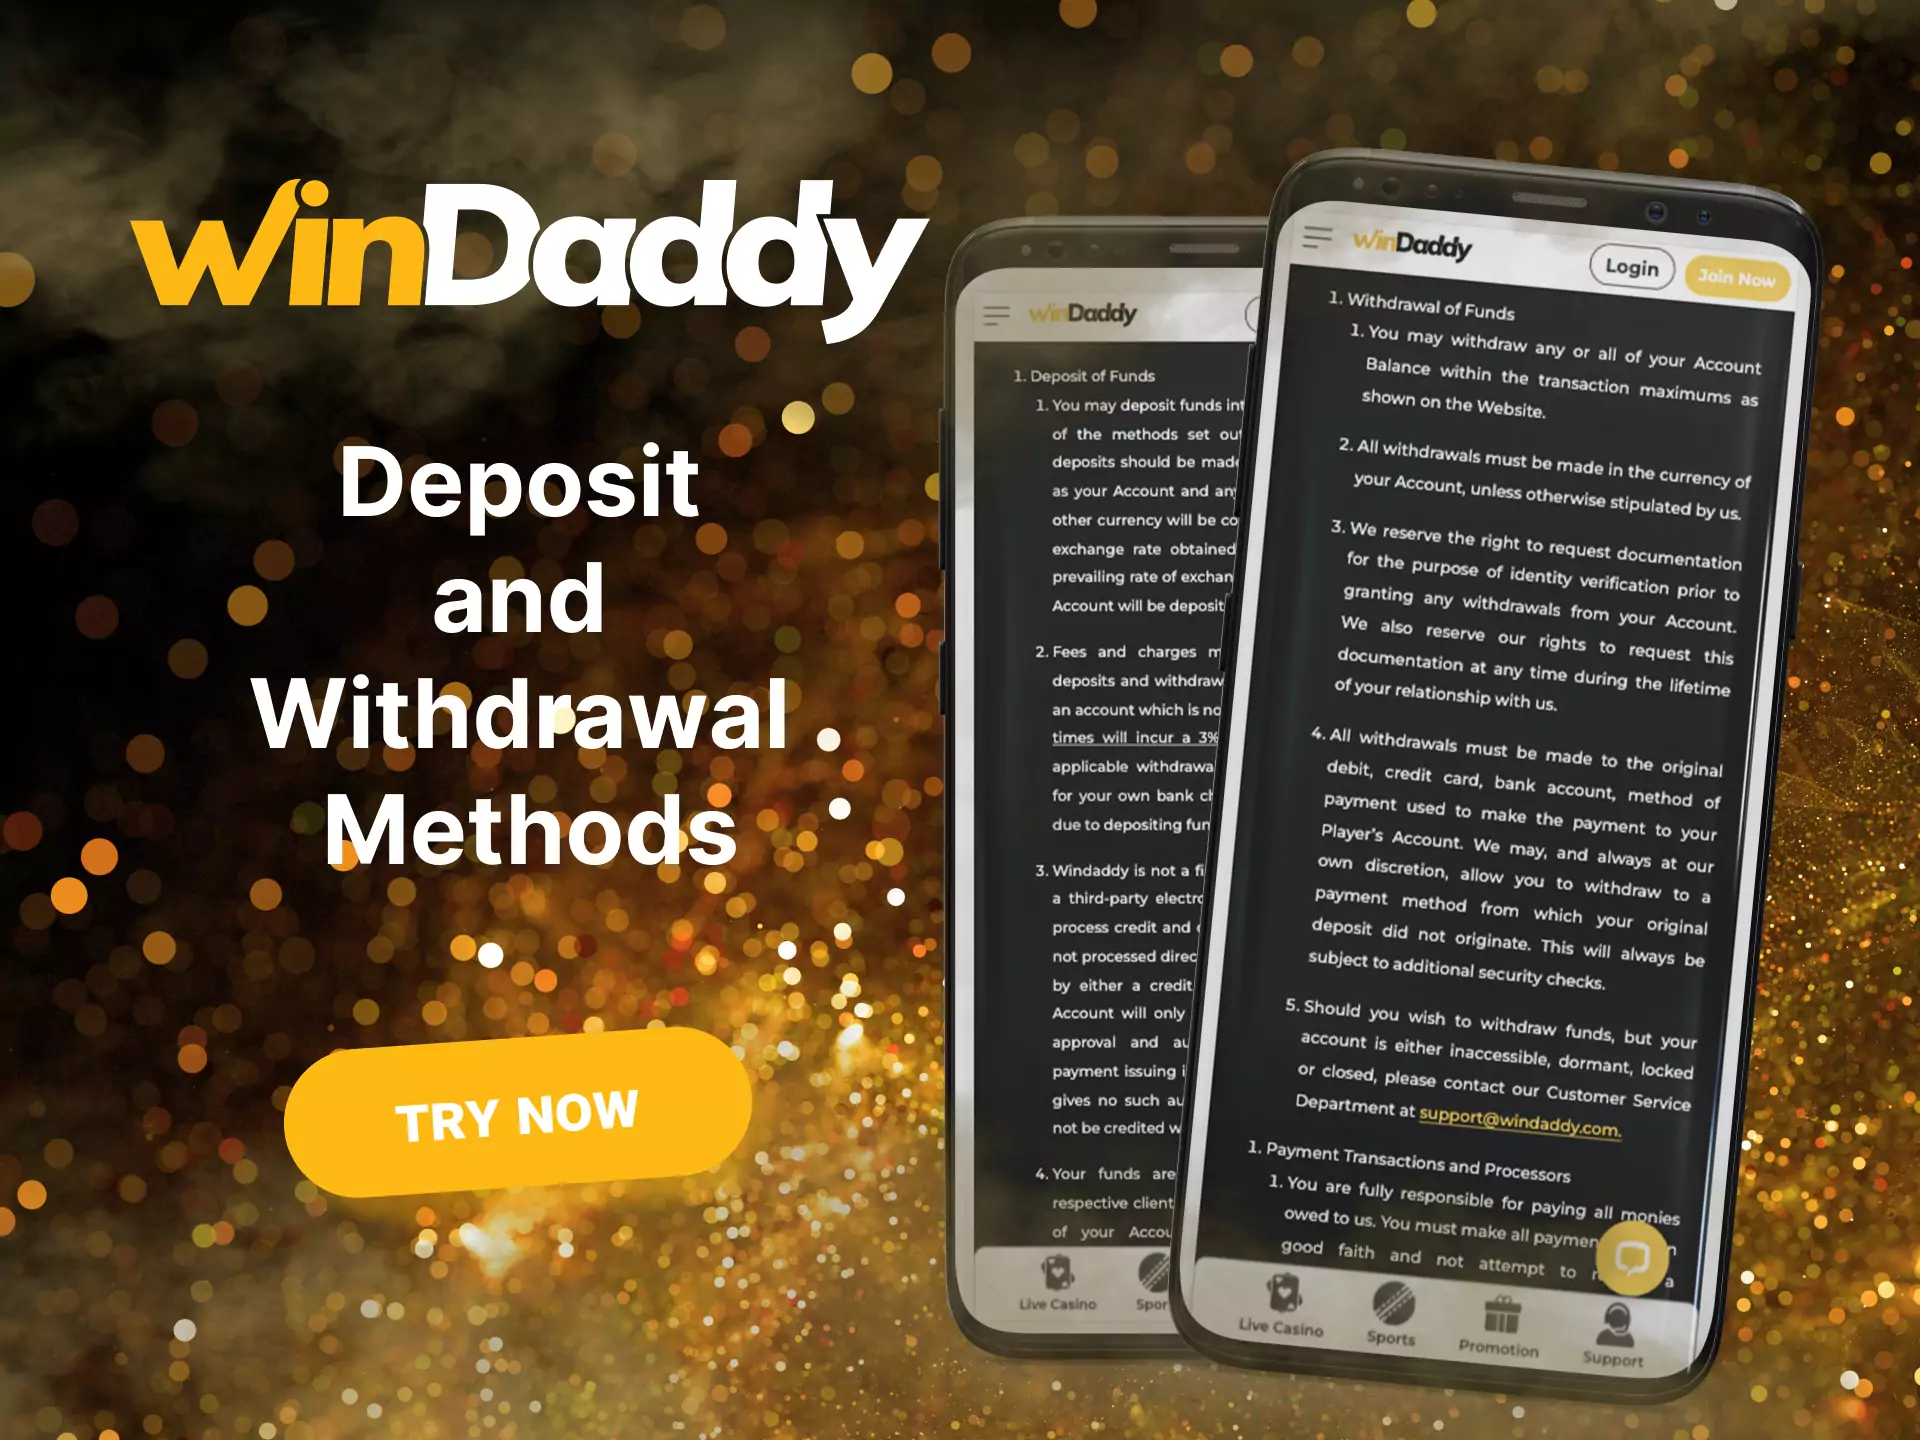 Try comfortable deposit and withdrawal methods at Windaddy.